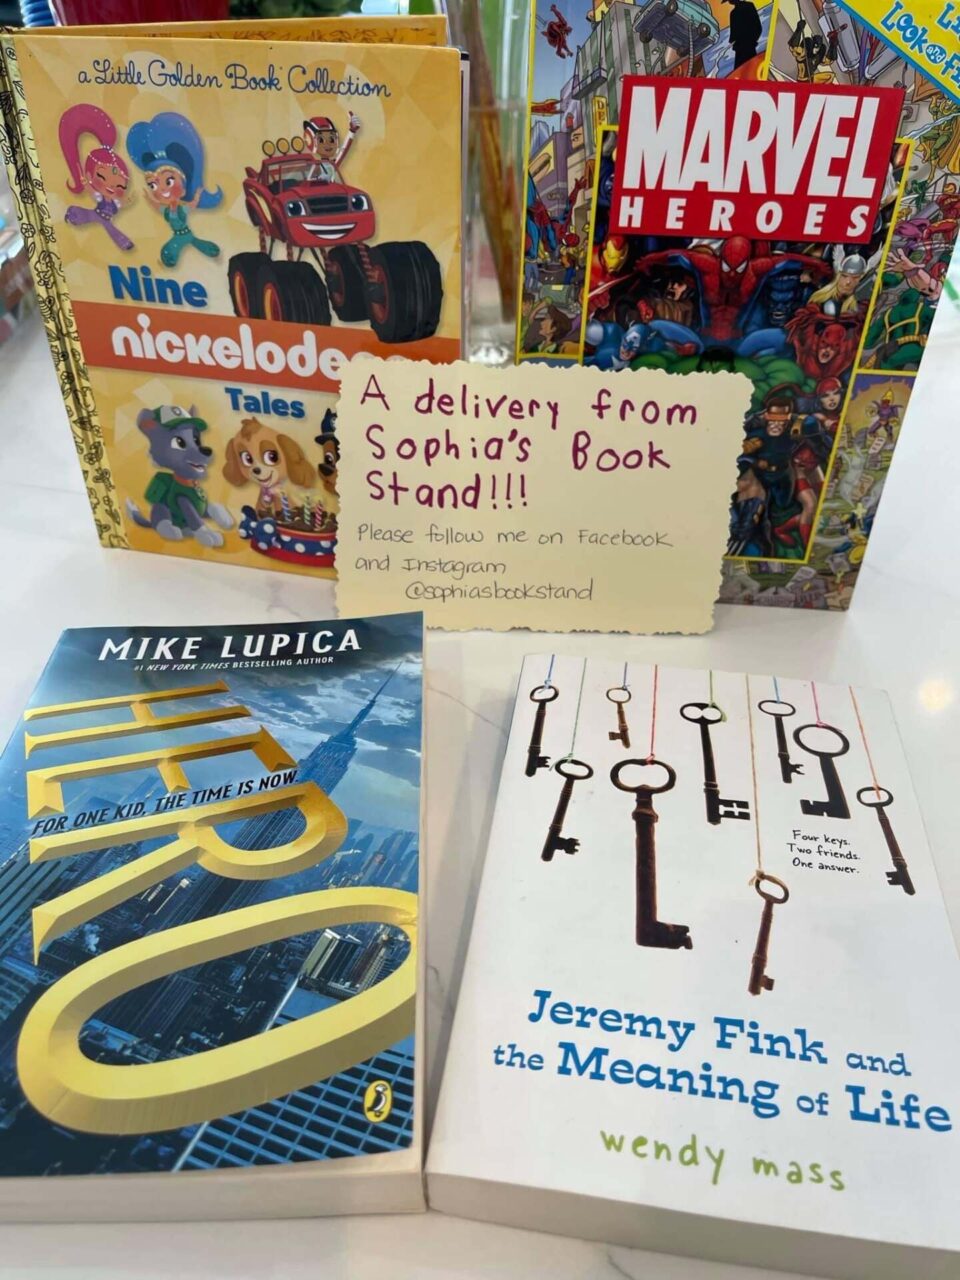 Sophia's Book Stand, Sophia’s Book Stand: “Making Sure All Kids Have Books to Read”